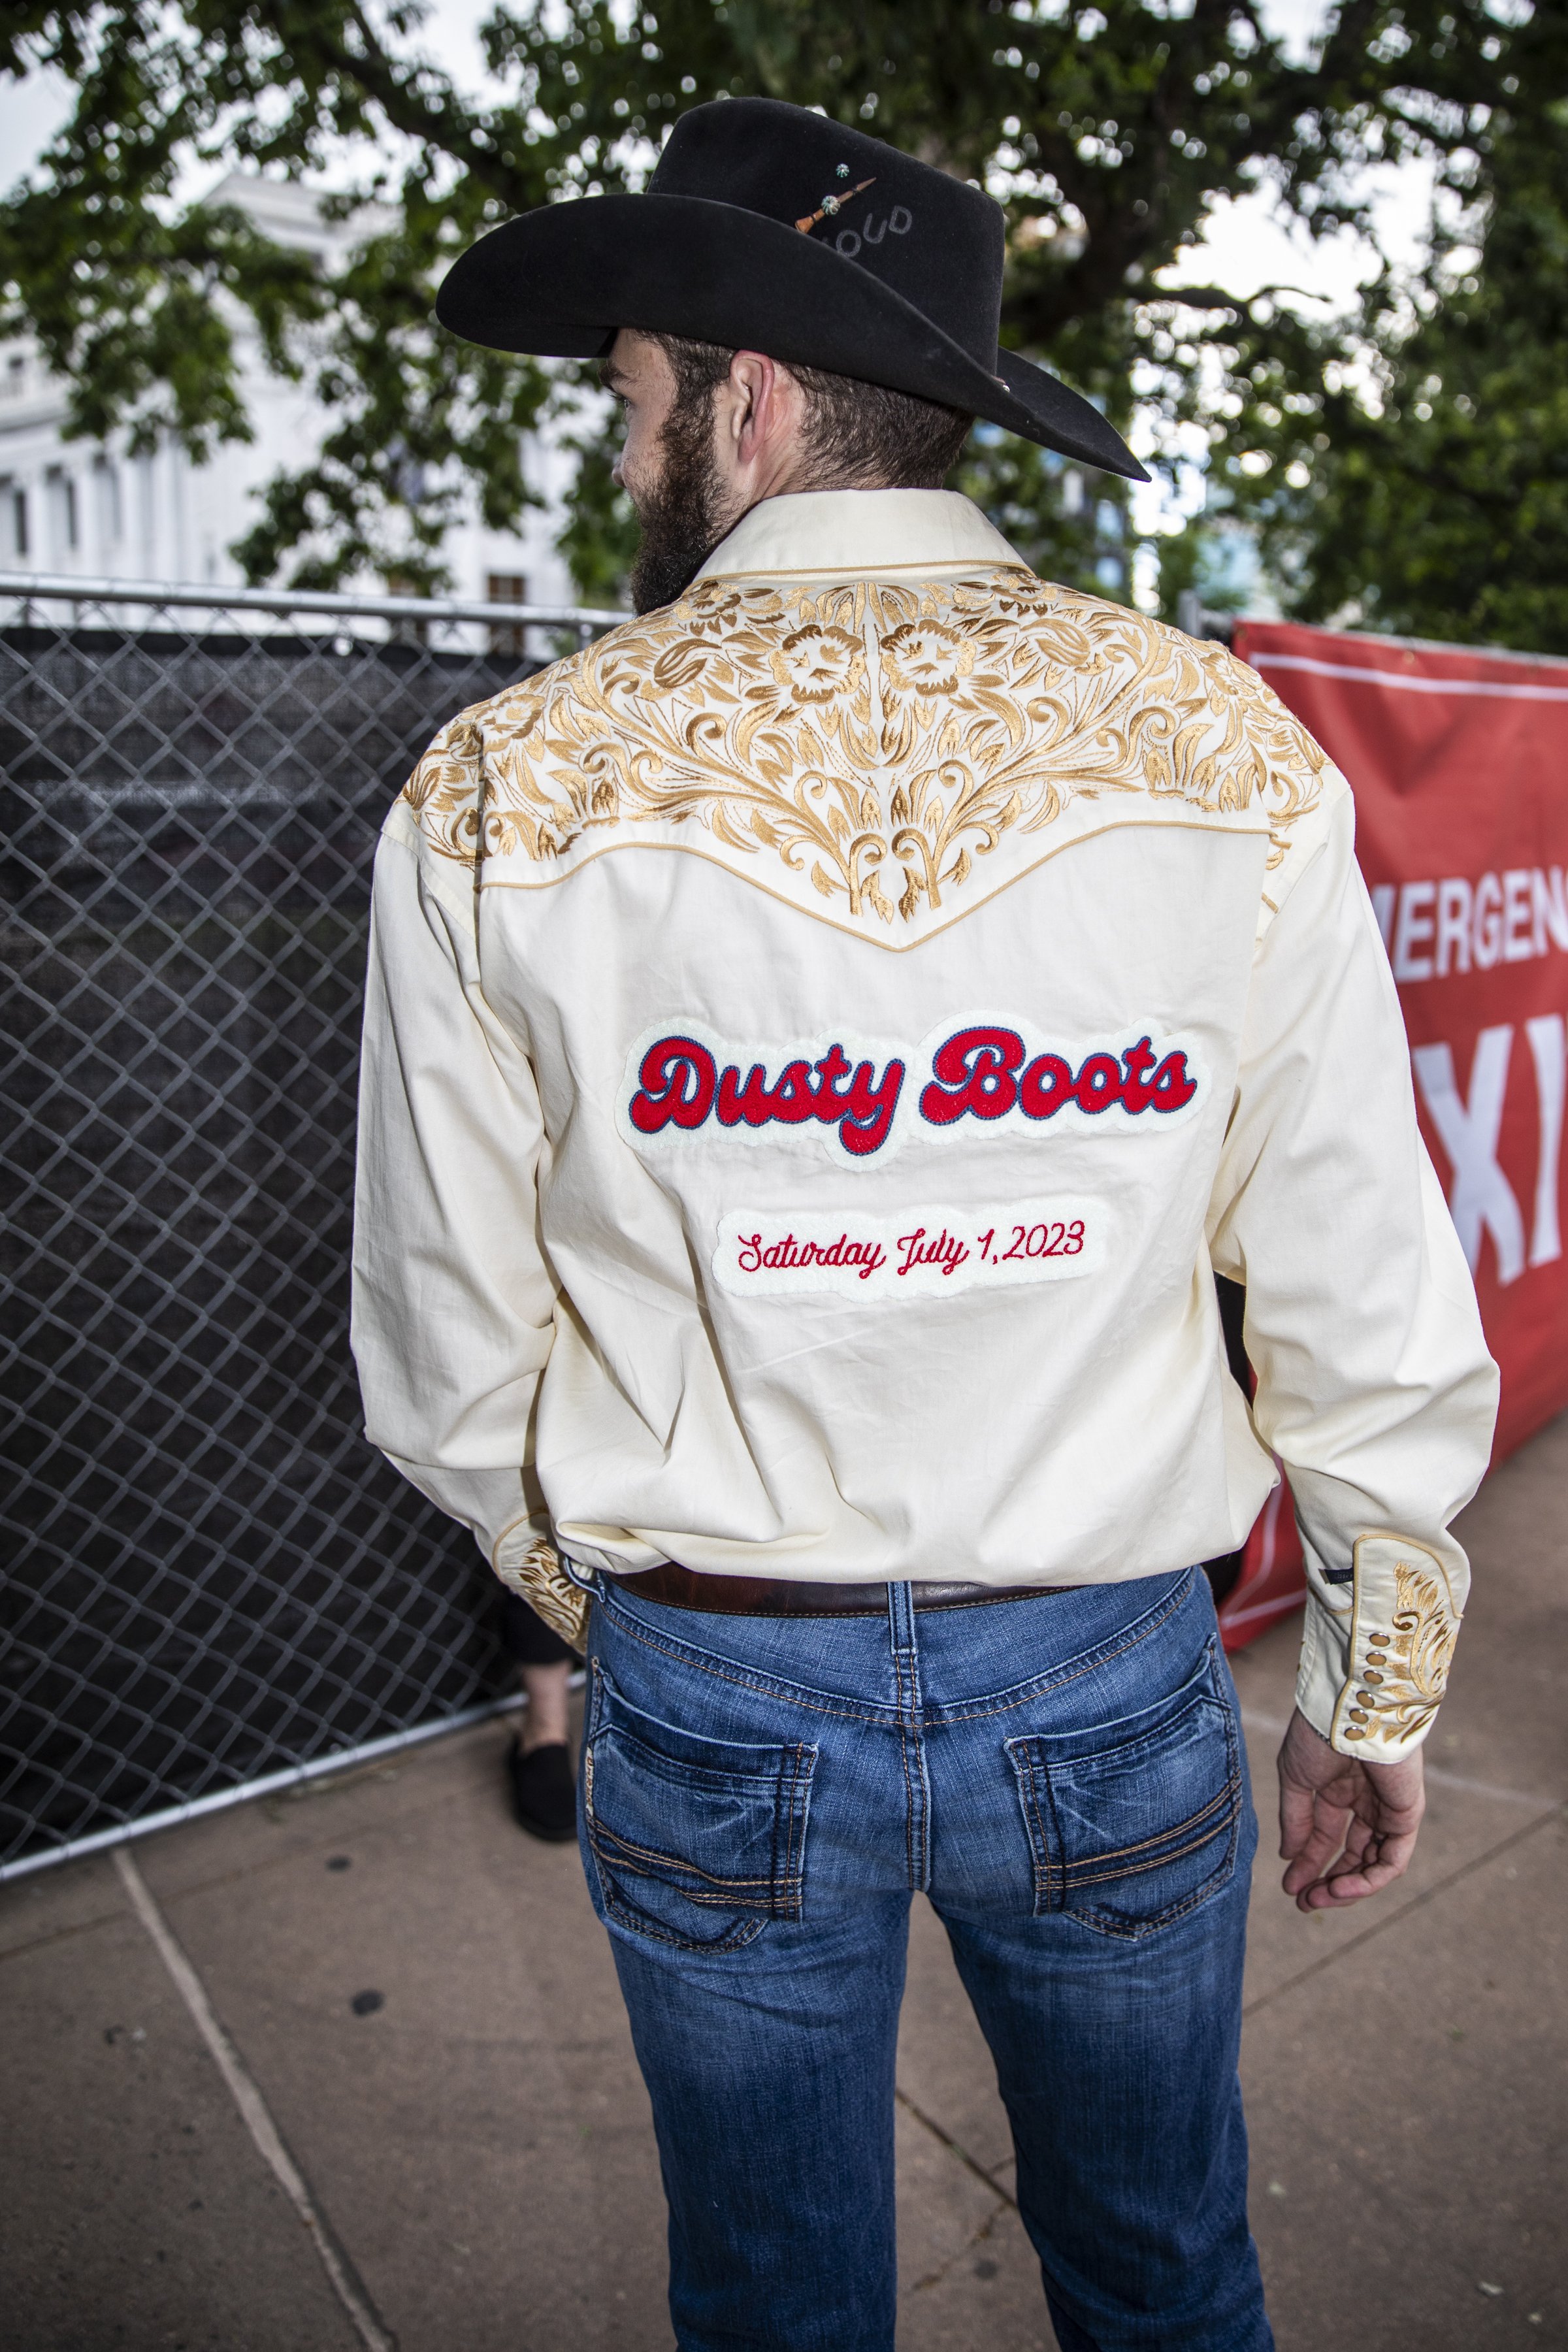 Dusty Boots Music Festival - Colter Wall, Margo Price, +MORE - Civic Center Park - Denver, Colorado - Saturday, Juy 1st, 2023 - AEG - Mowgli Miles of Interracial Friends-11.JPG